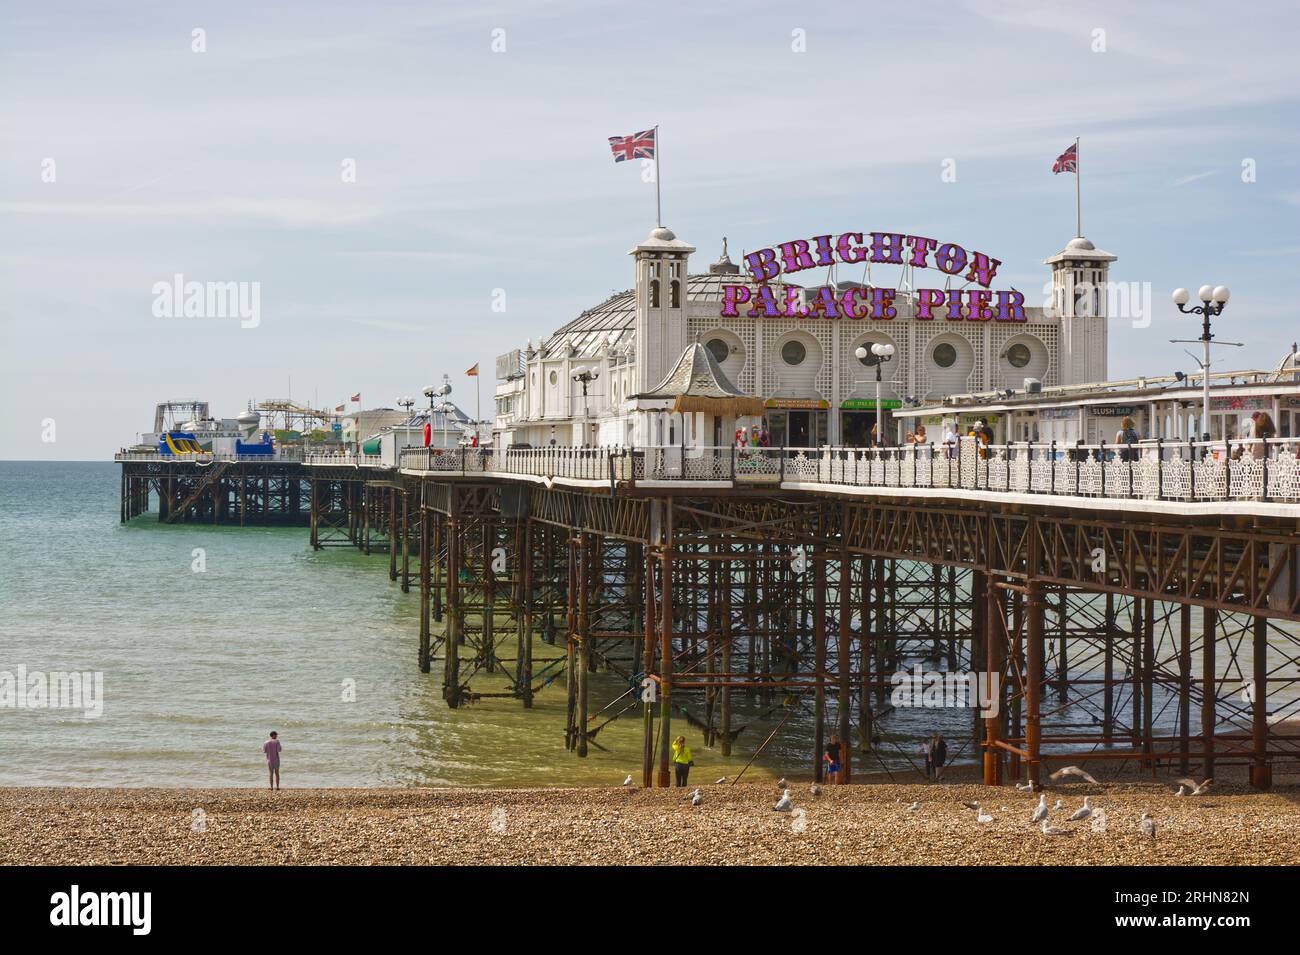 Brighton Palace Pier in East Sussex, England. With people on beach and pier. Stock Photo